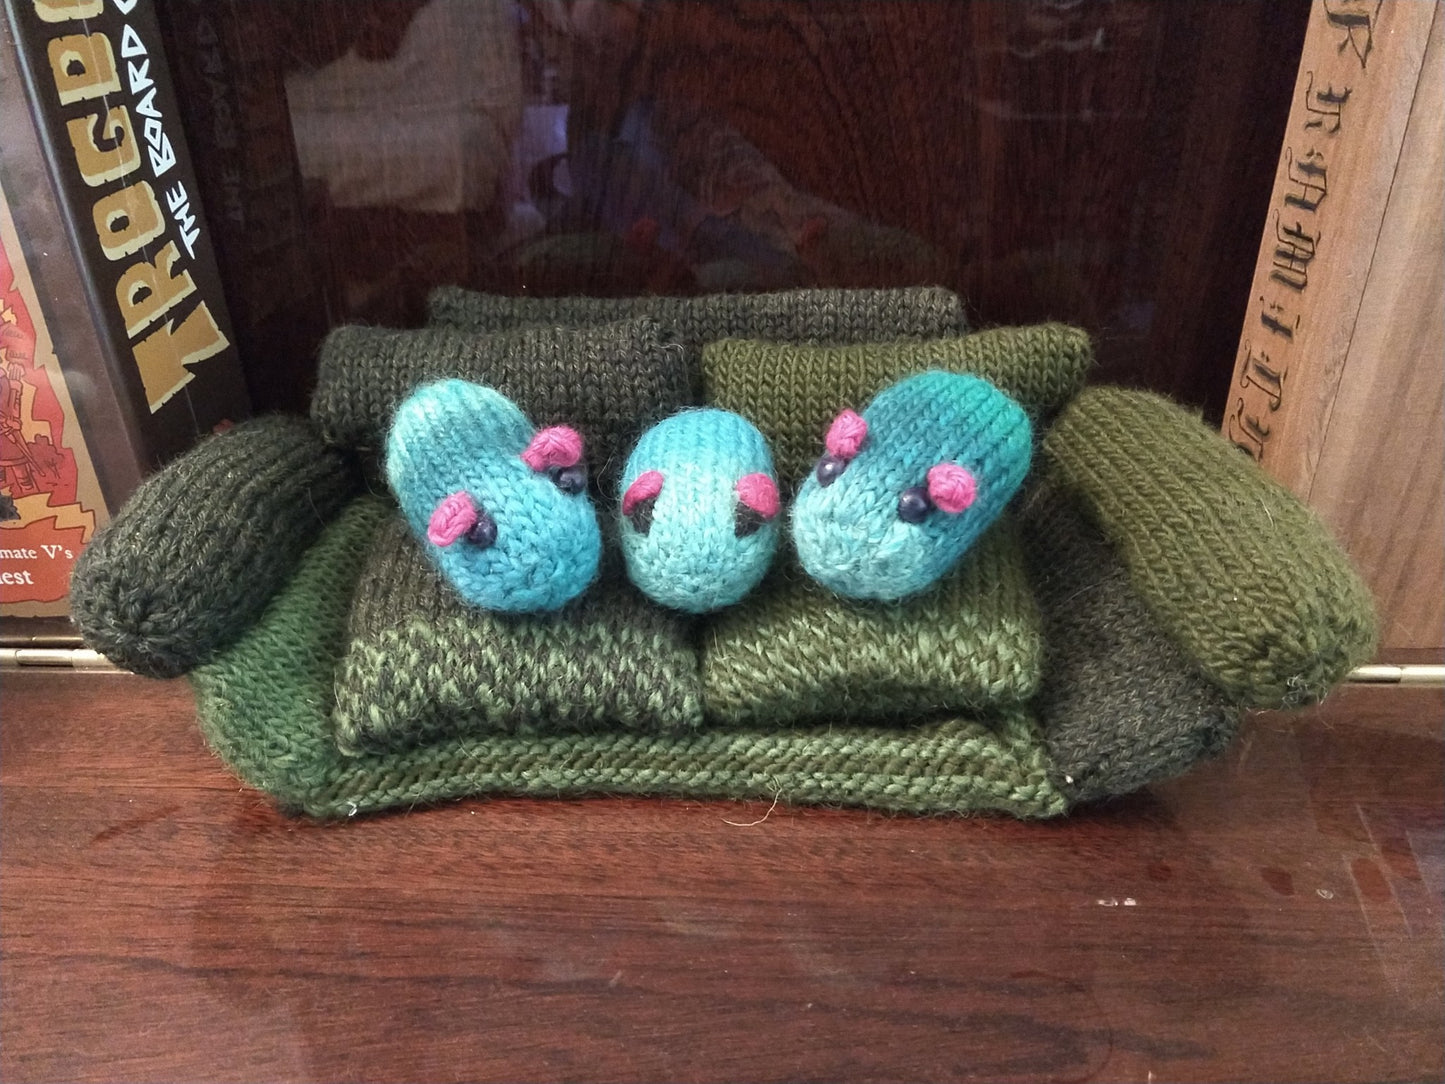 Tiny Knit Toy - Spooky Hamsterbeans Class - Saturday October 28th @11AM